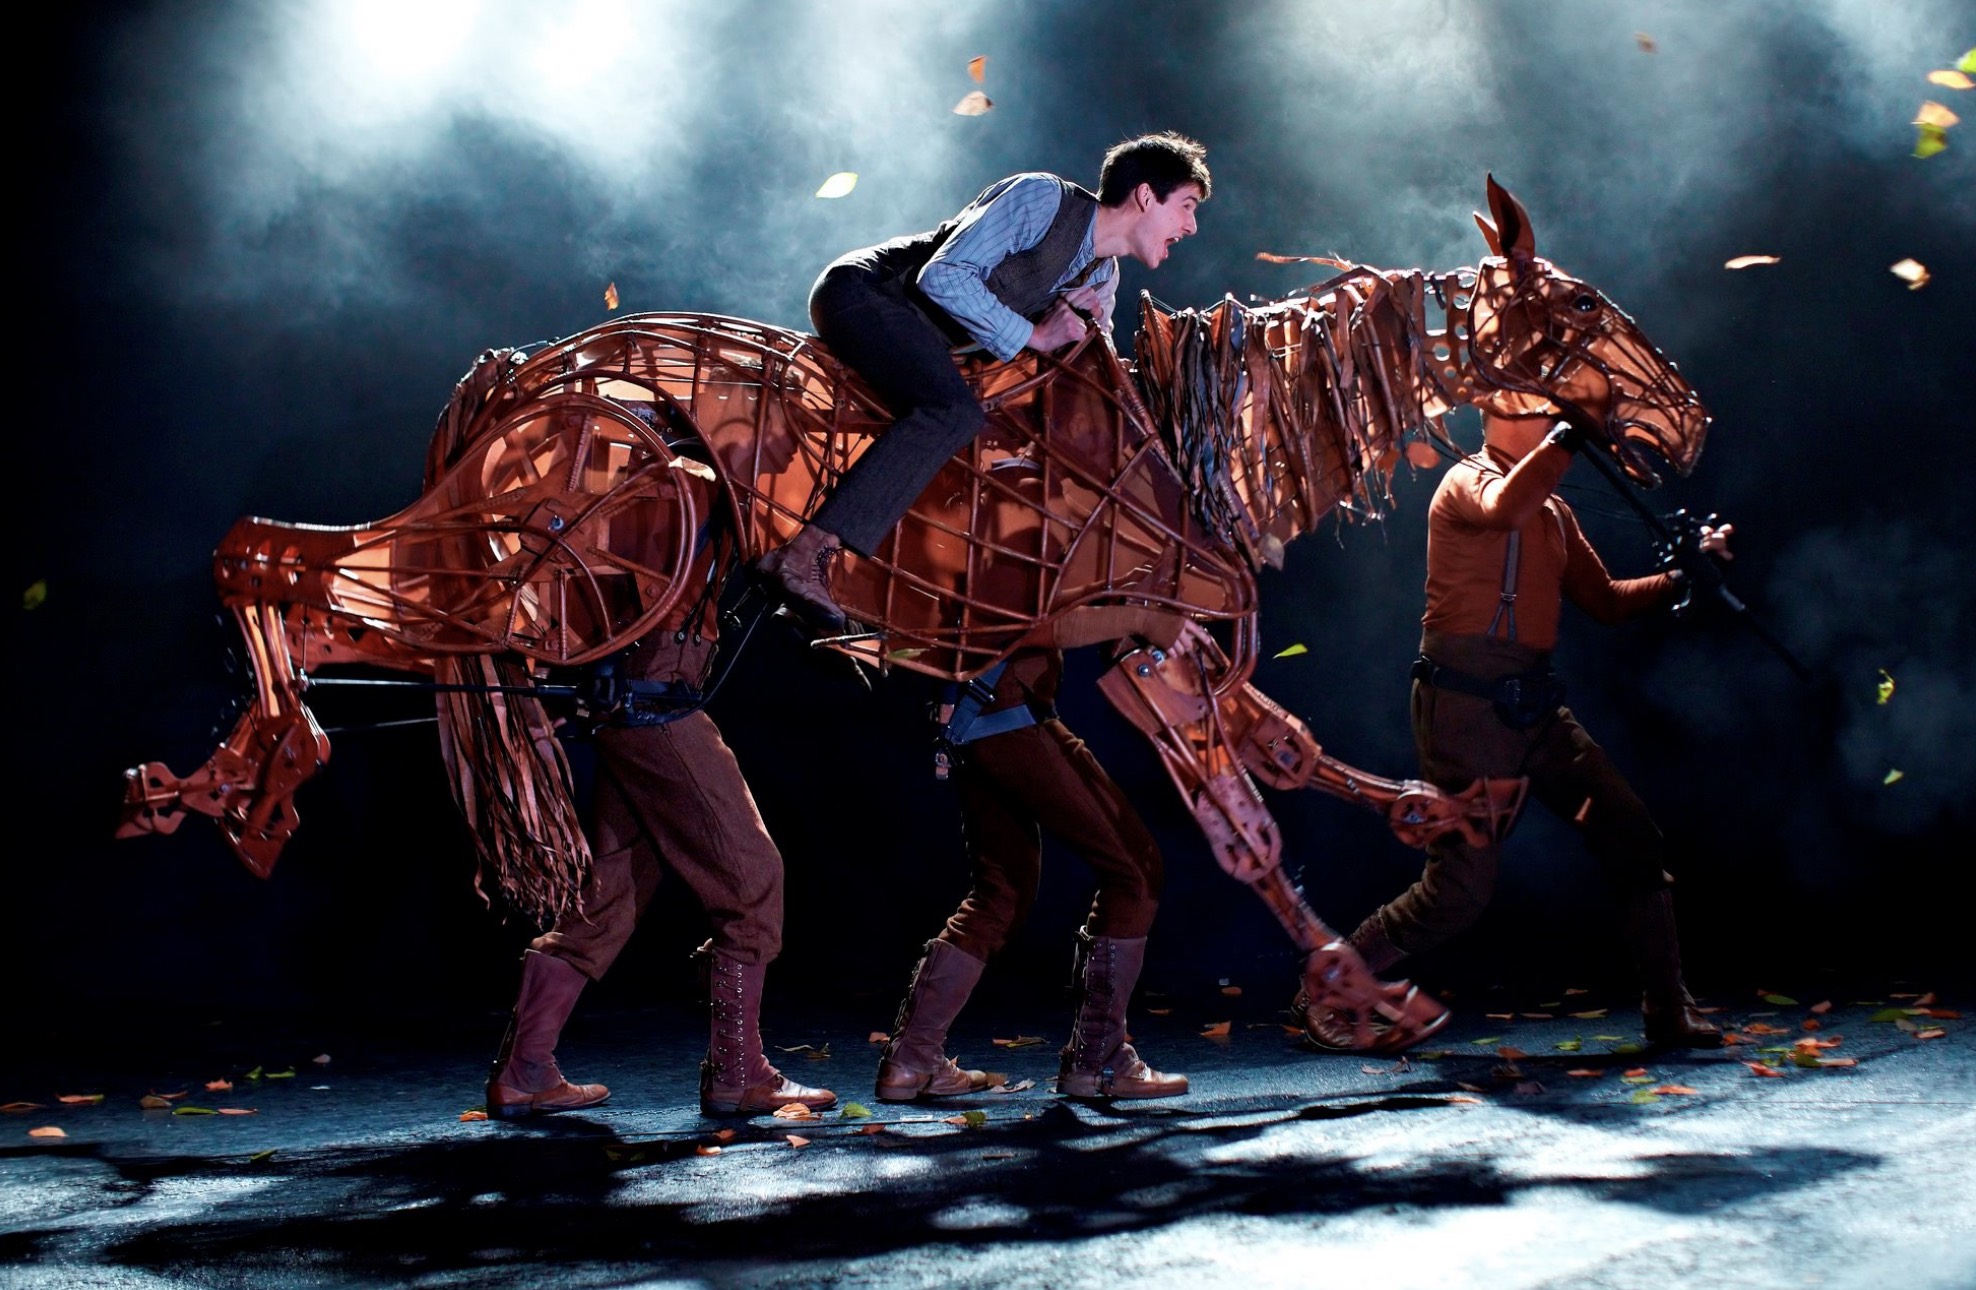 The National Theatre of Great Britain’s production of War Horse premieres in Hong Kong this week. Photo via Lunchbox Theatrical Productions